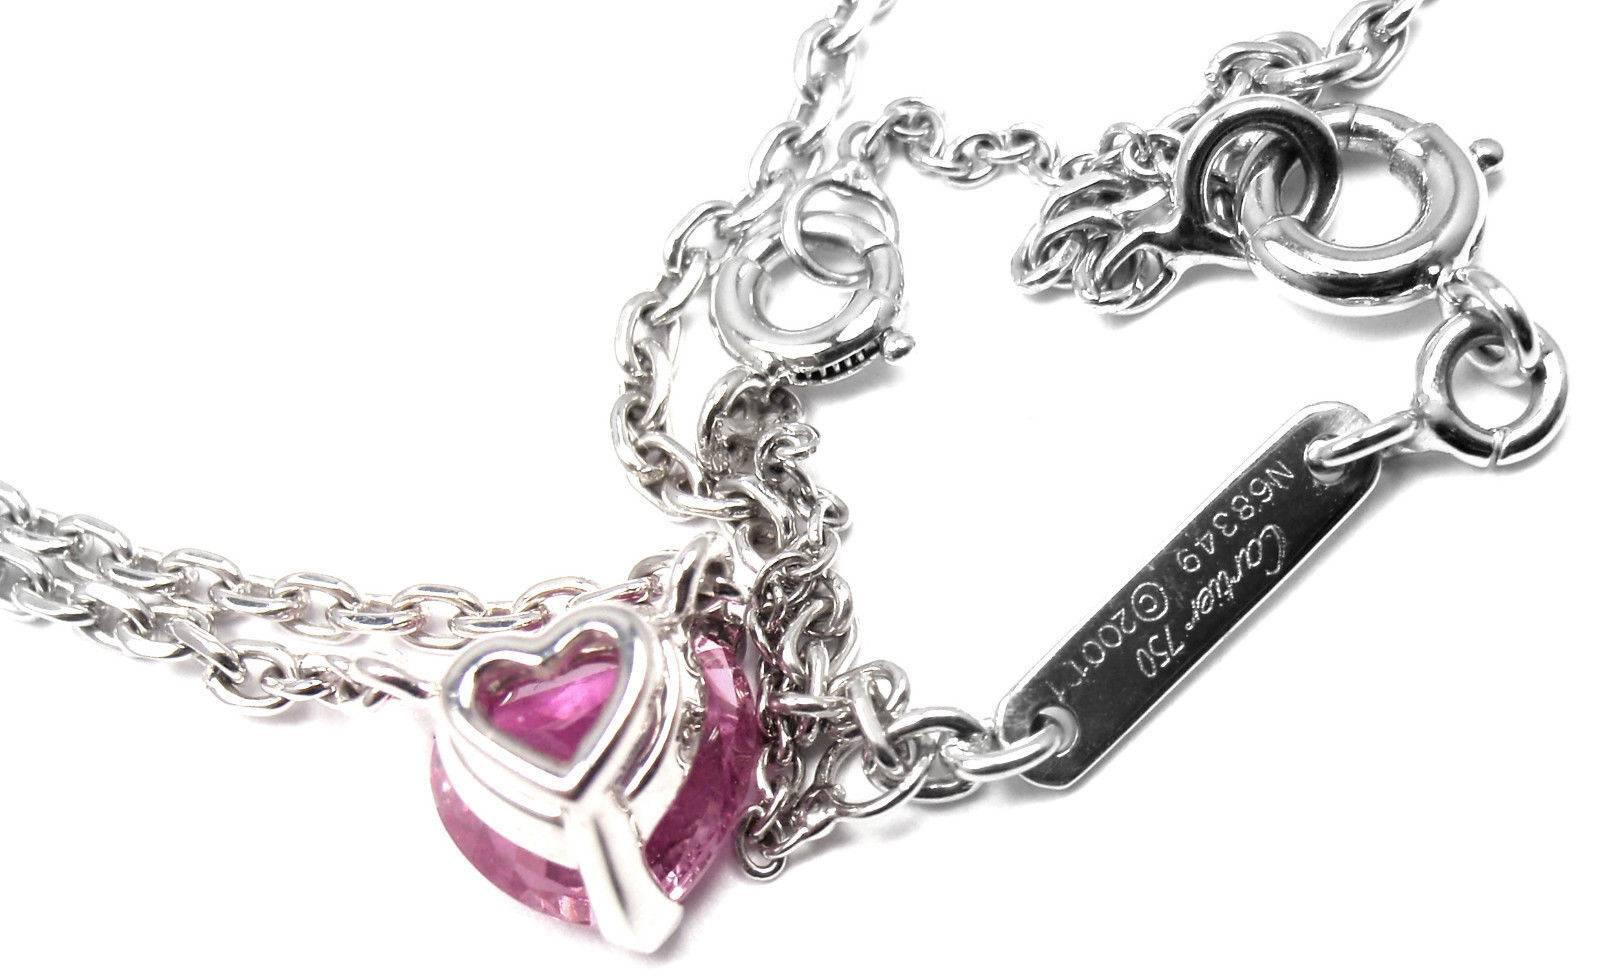 18k White Gold Heart Shaped Pink Sapphire Pendant Necklace by Cartier. 
With 1 heart shape pink sapphire 6.8mm x 6.65mm x 3.29mm  
Details: 
Length: 16''  
Width: 2mm
Pendant: 6.8mm x 6.65mm x 3.29mm 
Weight: 4.8grams 
Stamped Hallmarks: 